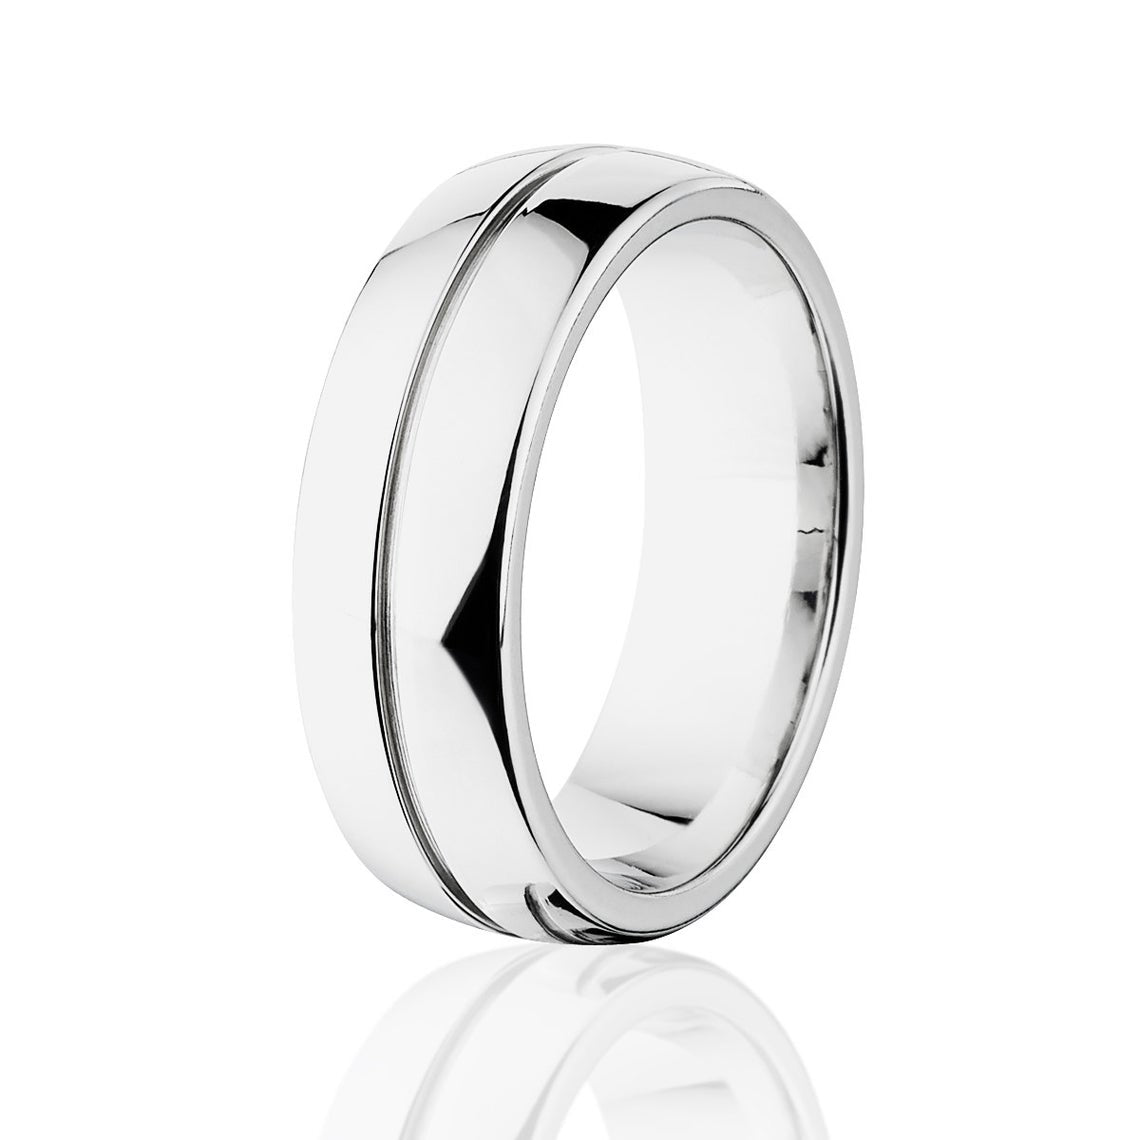 7mm wide cobalt wedding band with a center groove